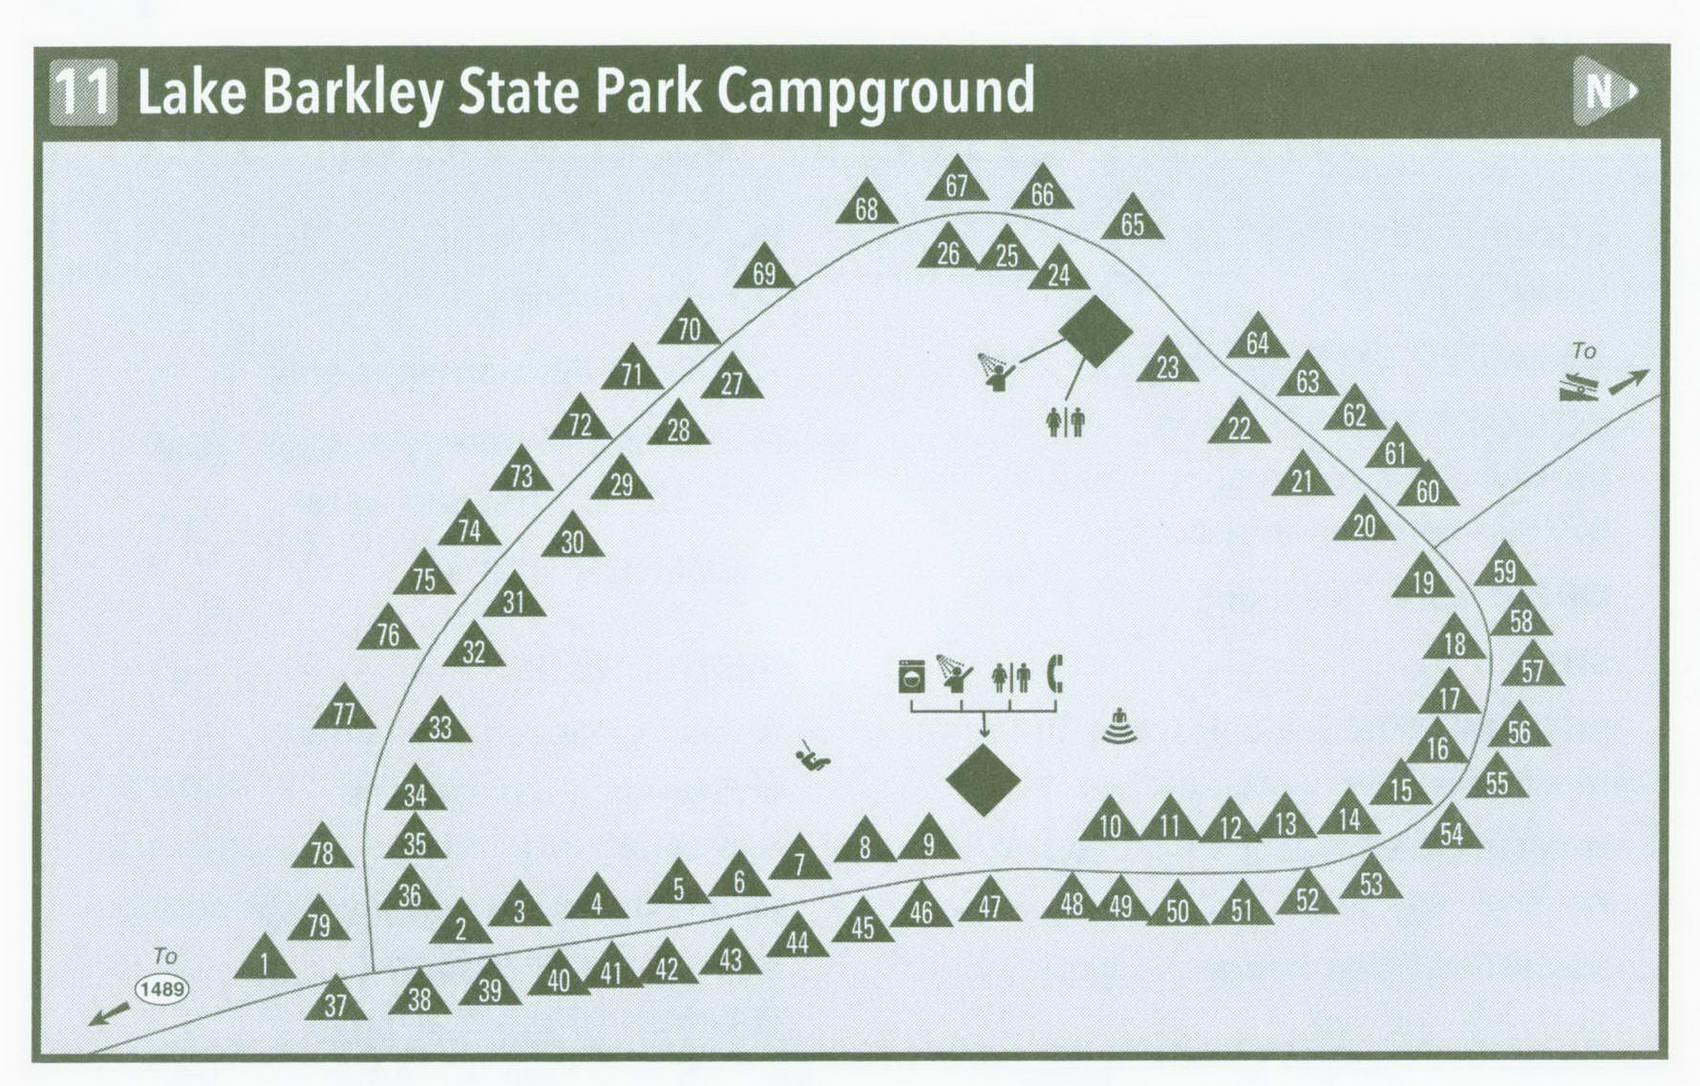 Lake Barkley State Park Campground In Kentucky On Map Ky How To Get Information U S